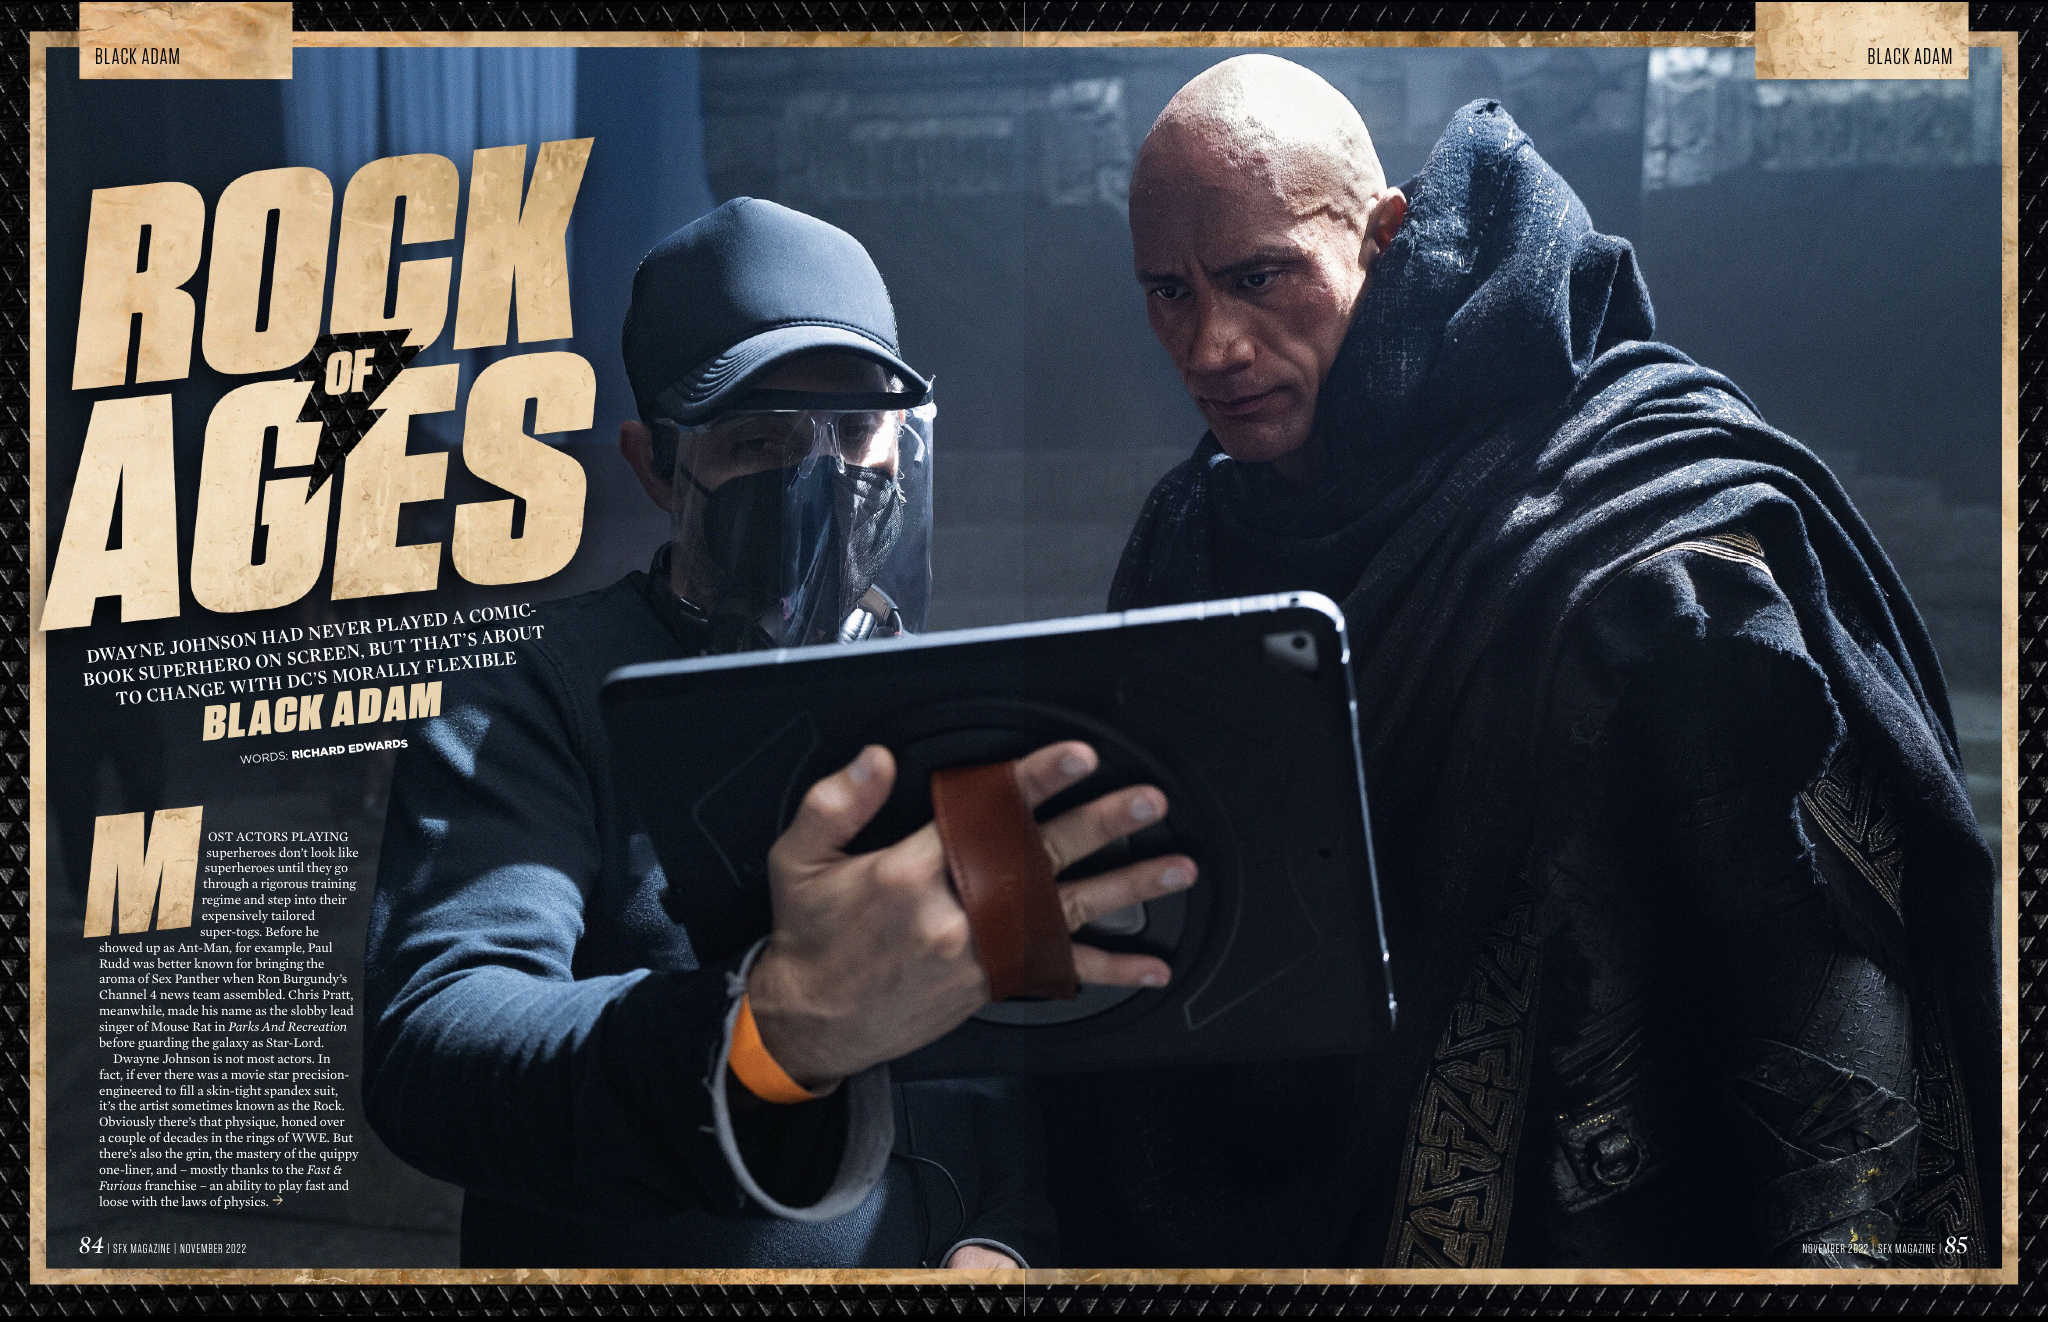 Director Jaume Collet-Serra and Dwayne Johnson looking at an iPad.